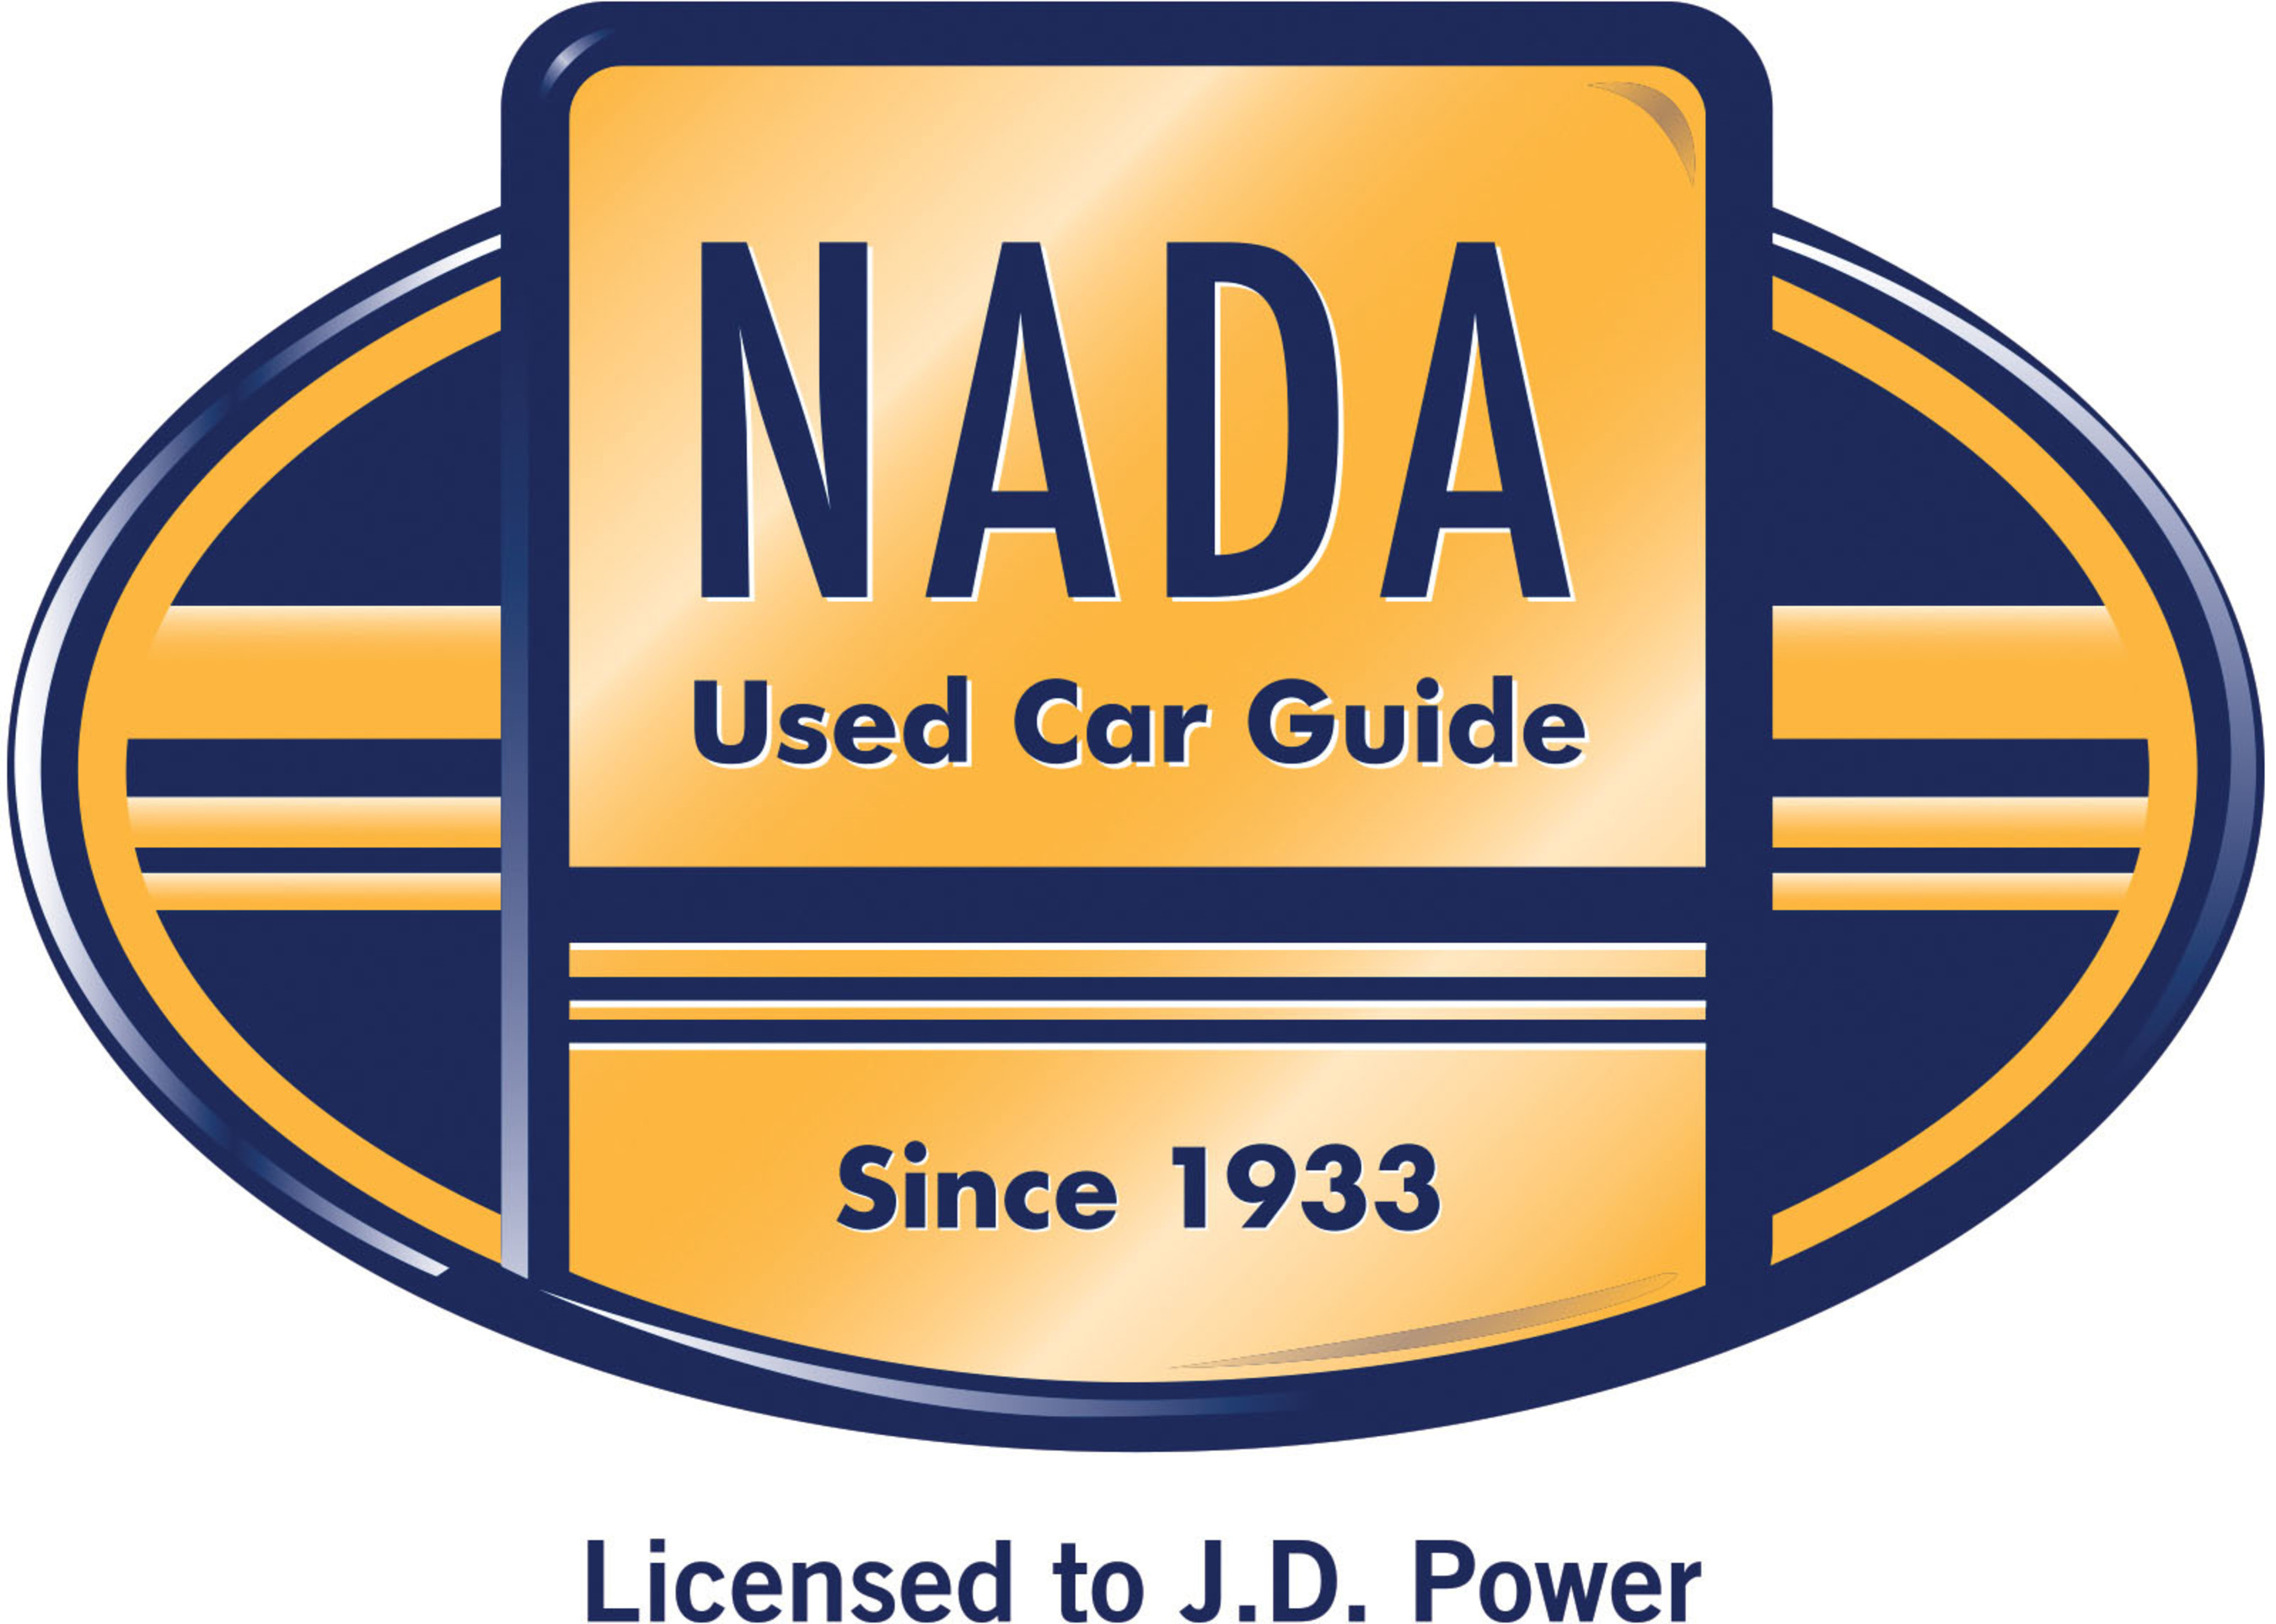 Since 1933, NADA Used Car Guide has earned its reputation as the leading provider of vehicle valuation products, services and information to businesses throughout the United States and worldwide. NADA's editorial team collects and analyzes over 1 million combined automotive and truck wholesale and retail transactions per month. Its guidebooks, auction data, analysis and data solutions offer automotive/truck, finance, insurance and government professionals the timely information and reliable solutions they need to make better business decisions.